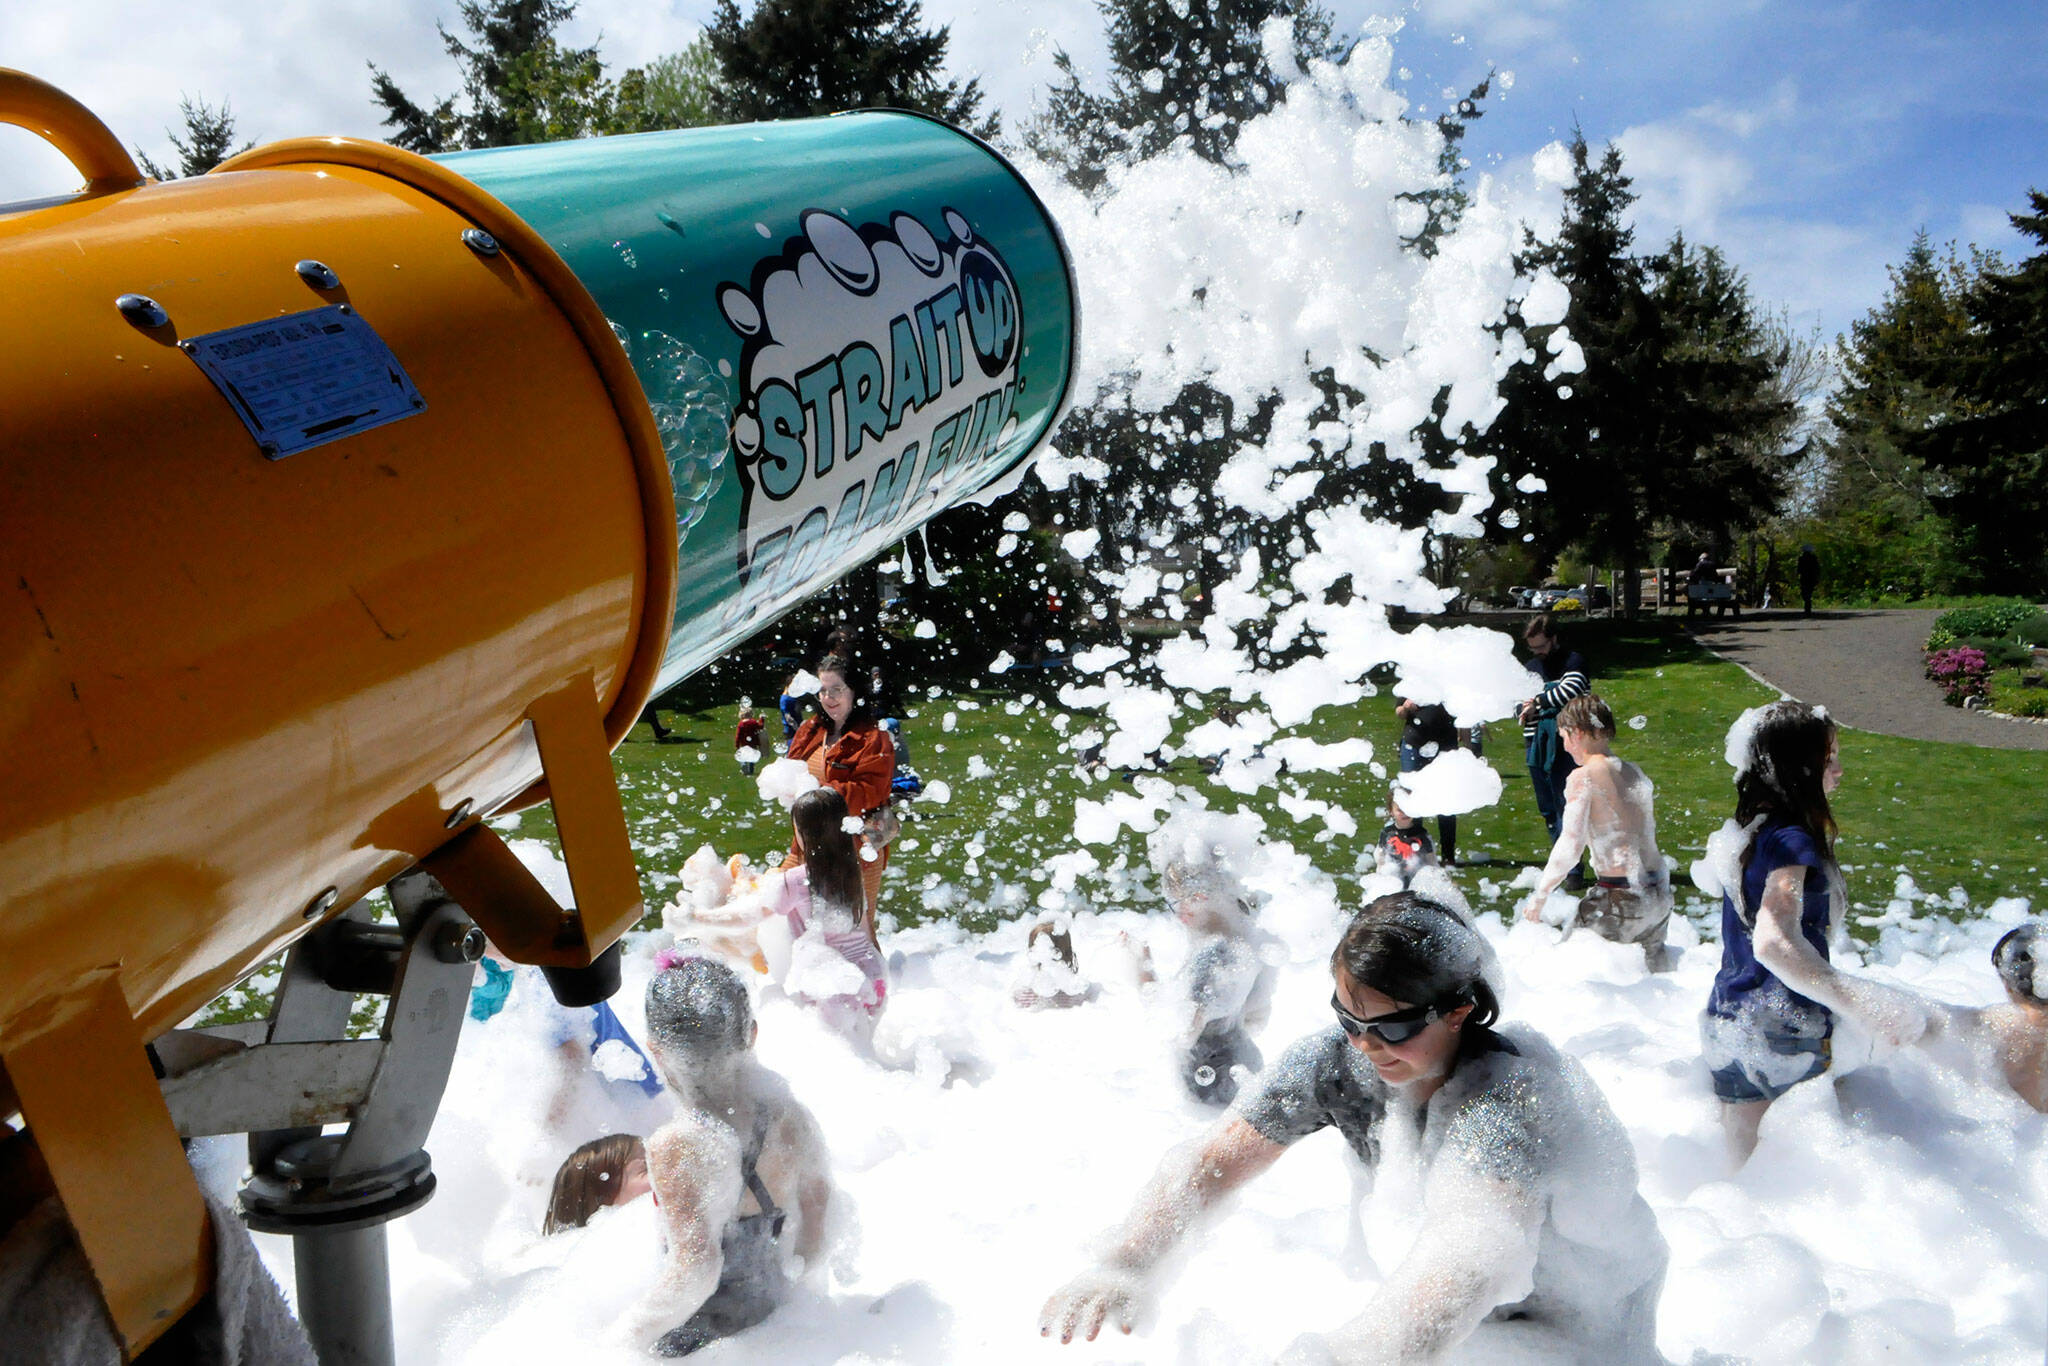 Sequim Gazette photo by Matthew Nash/ As part of Family Fun Days, Strait Up Foam Fun came to Carrie Blake Community Park on Sunday offering children and adults the chance to play in the eco-friendly, biodegradable foam for hours.